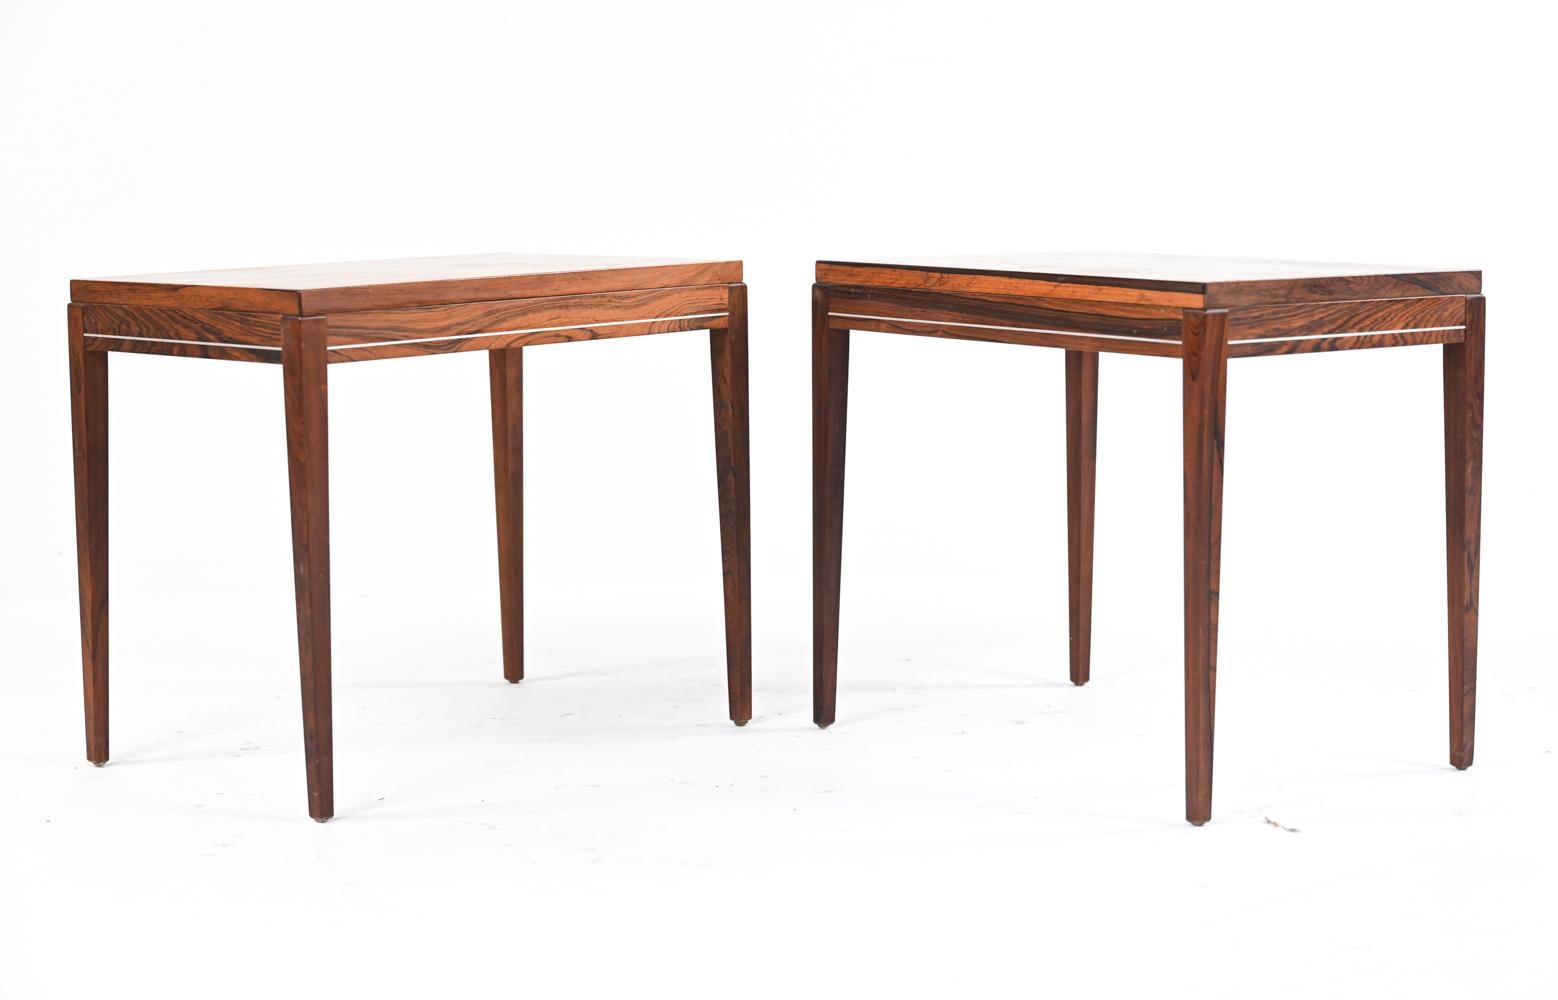 A unique and unusual pair of Mid-Century Modern rosewood side tables with delicate banded aluminum inlay that gives off a warm glow in the light. Apparently unmarked, in the style of Harvey Probber, Edward Wormley, or Rud Thygesen.